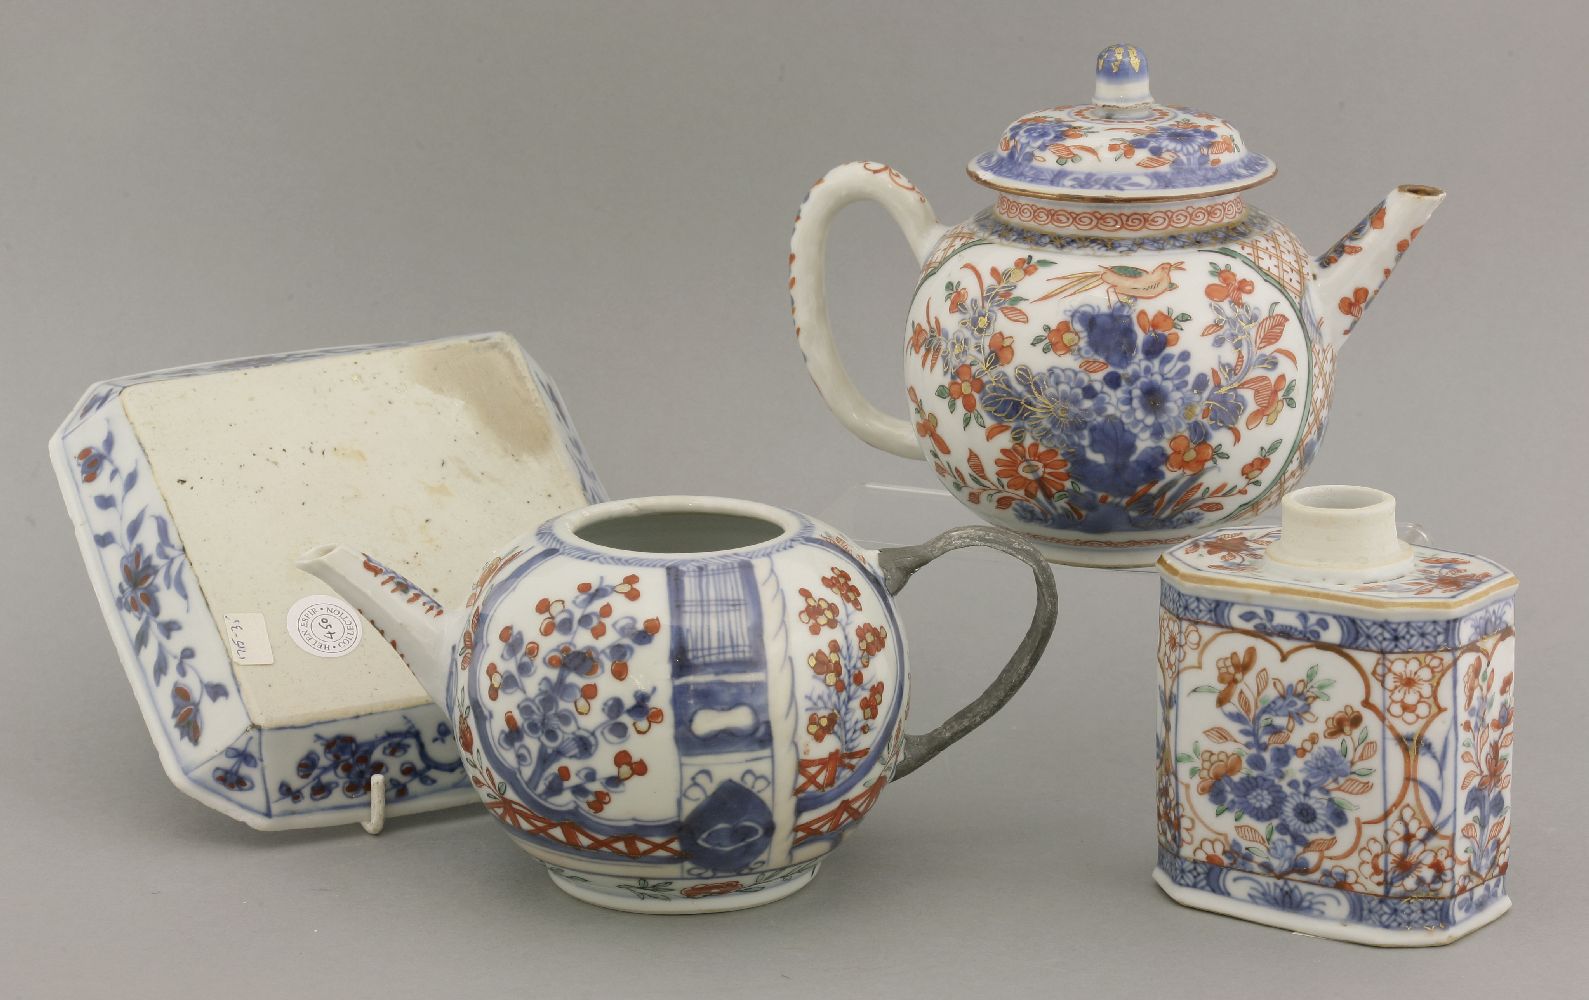 Two Dutch decorated Teapots and one Cover,Kangxi (1662-1722), one with underglaze blue - Image 2 of 2